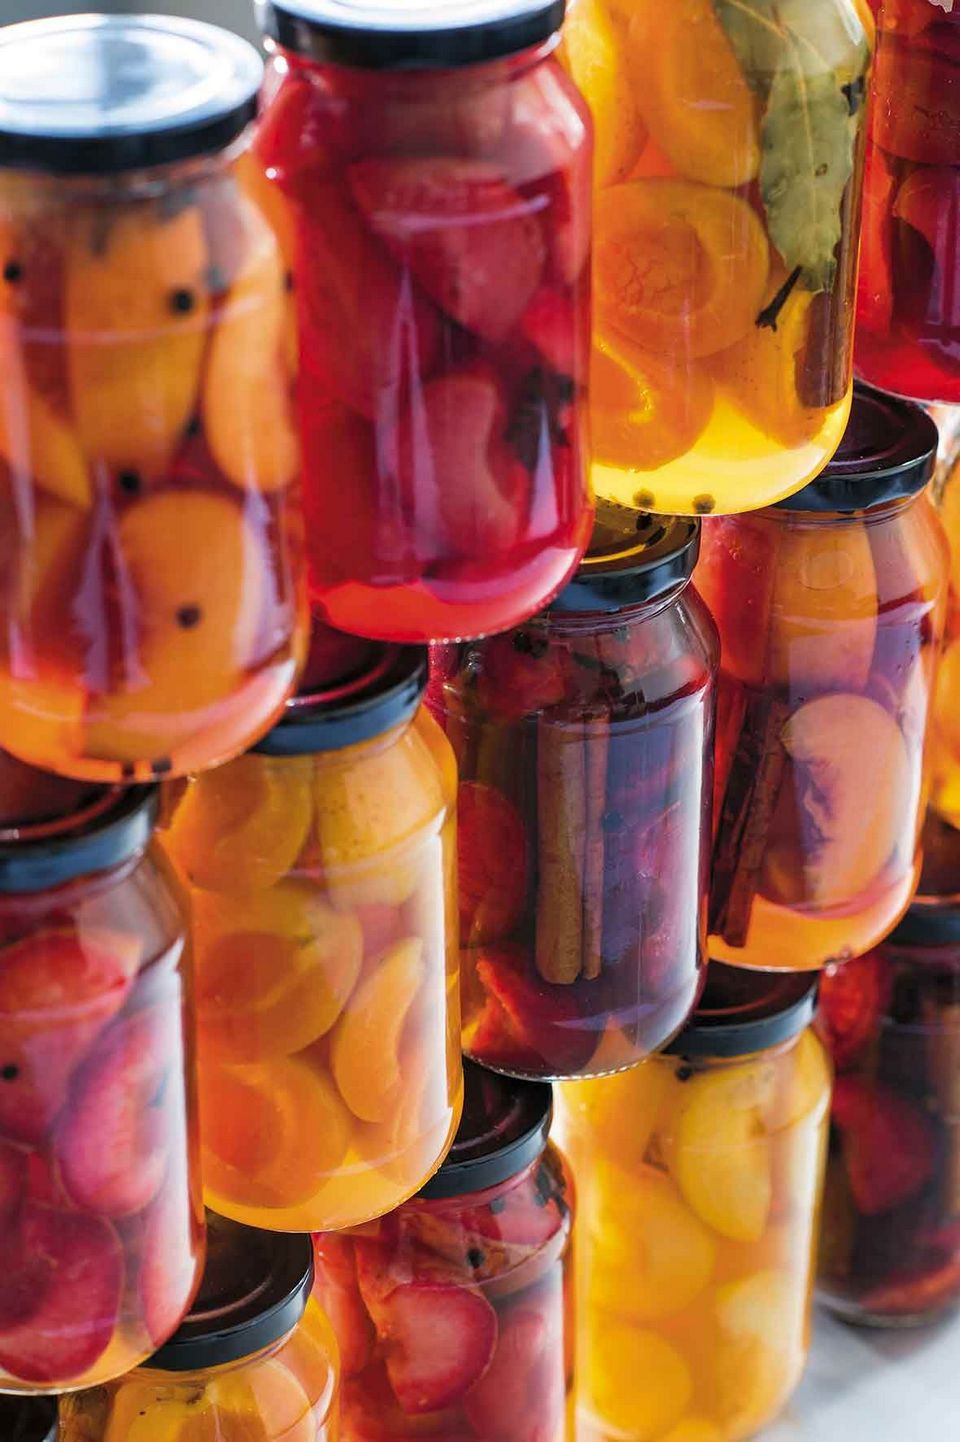 pickled fruits in the jars